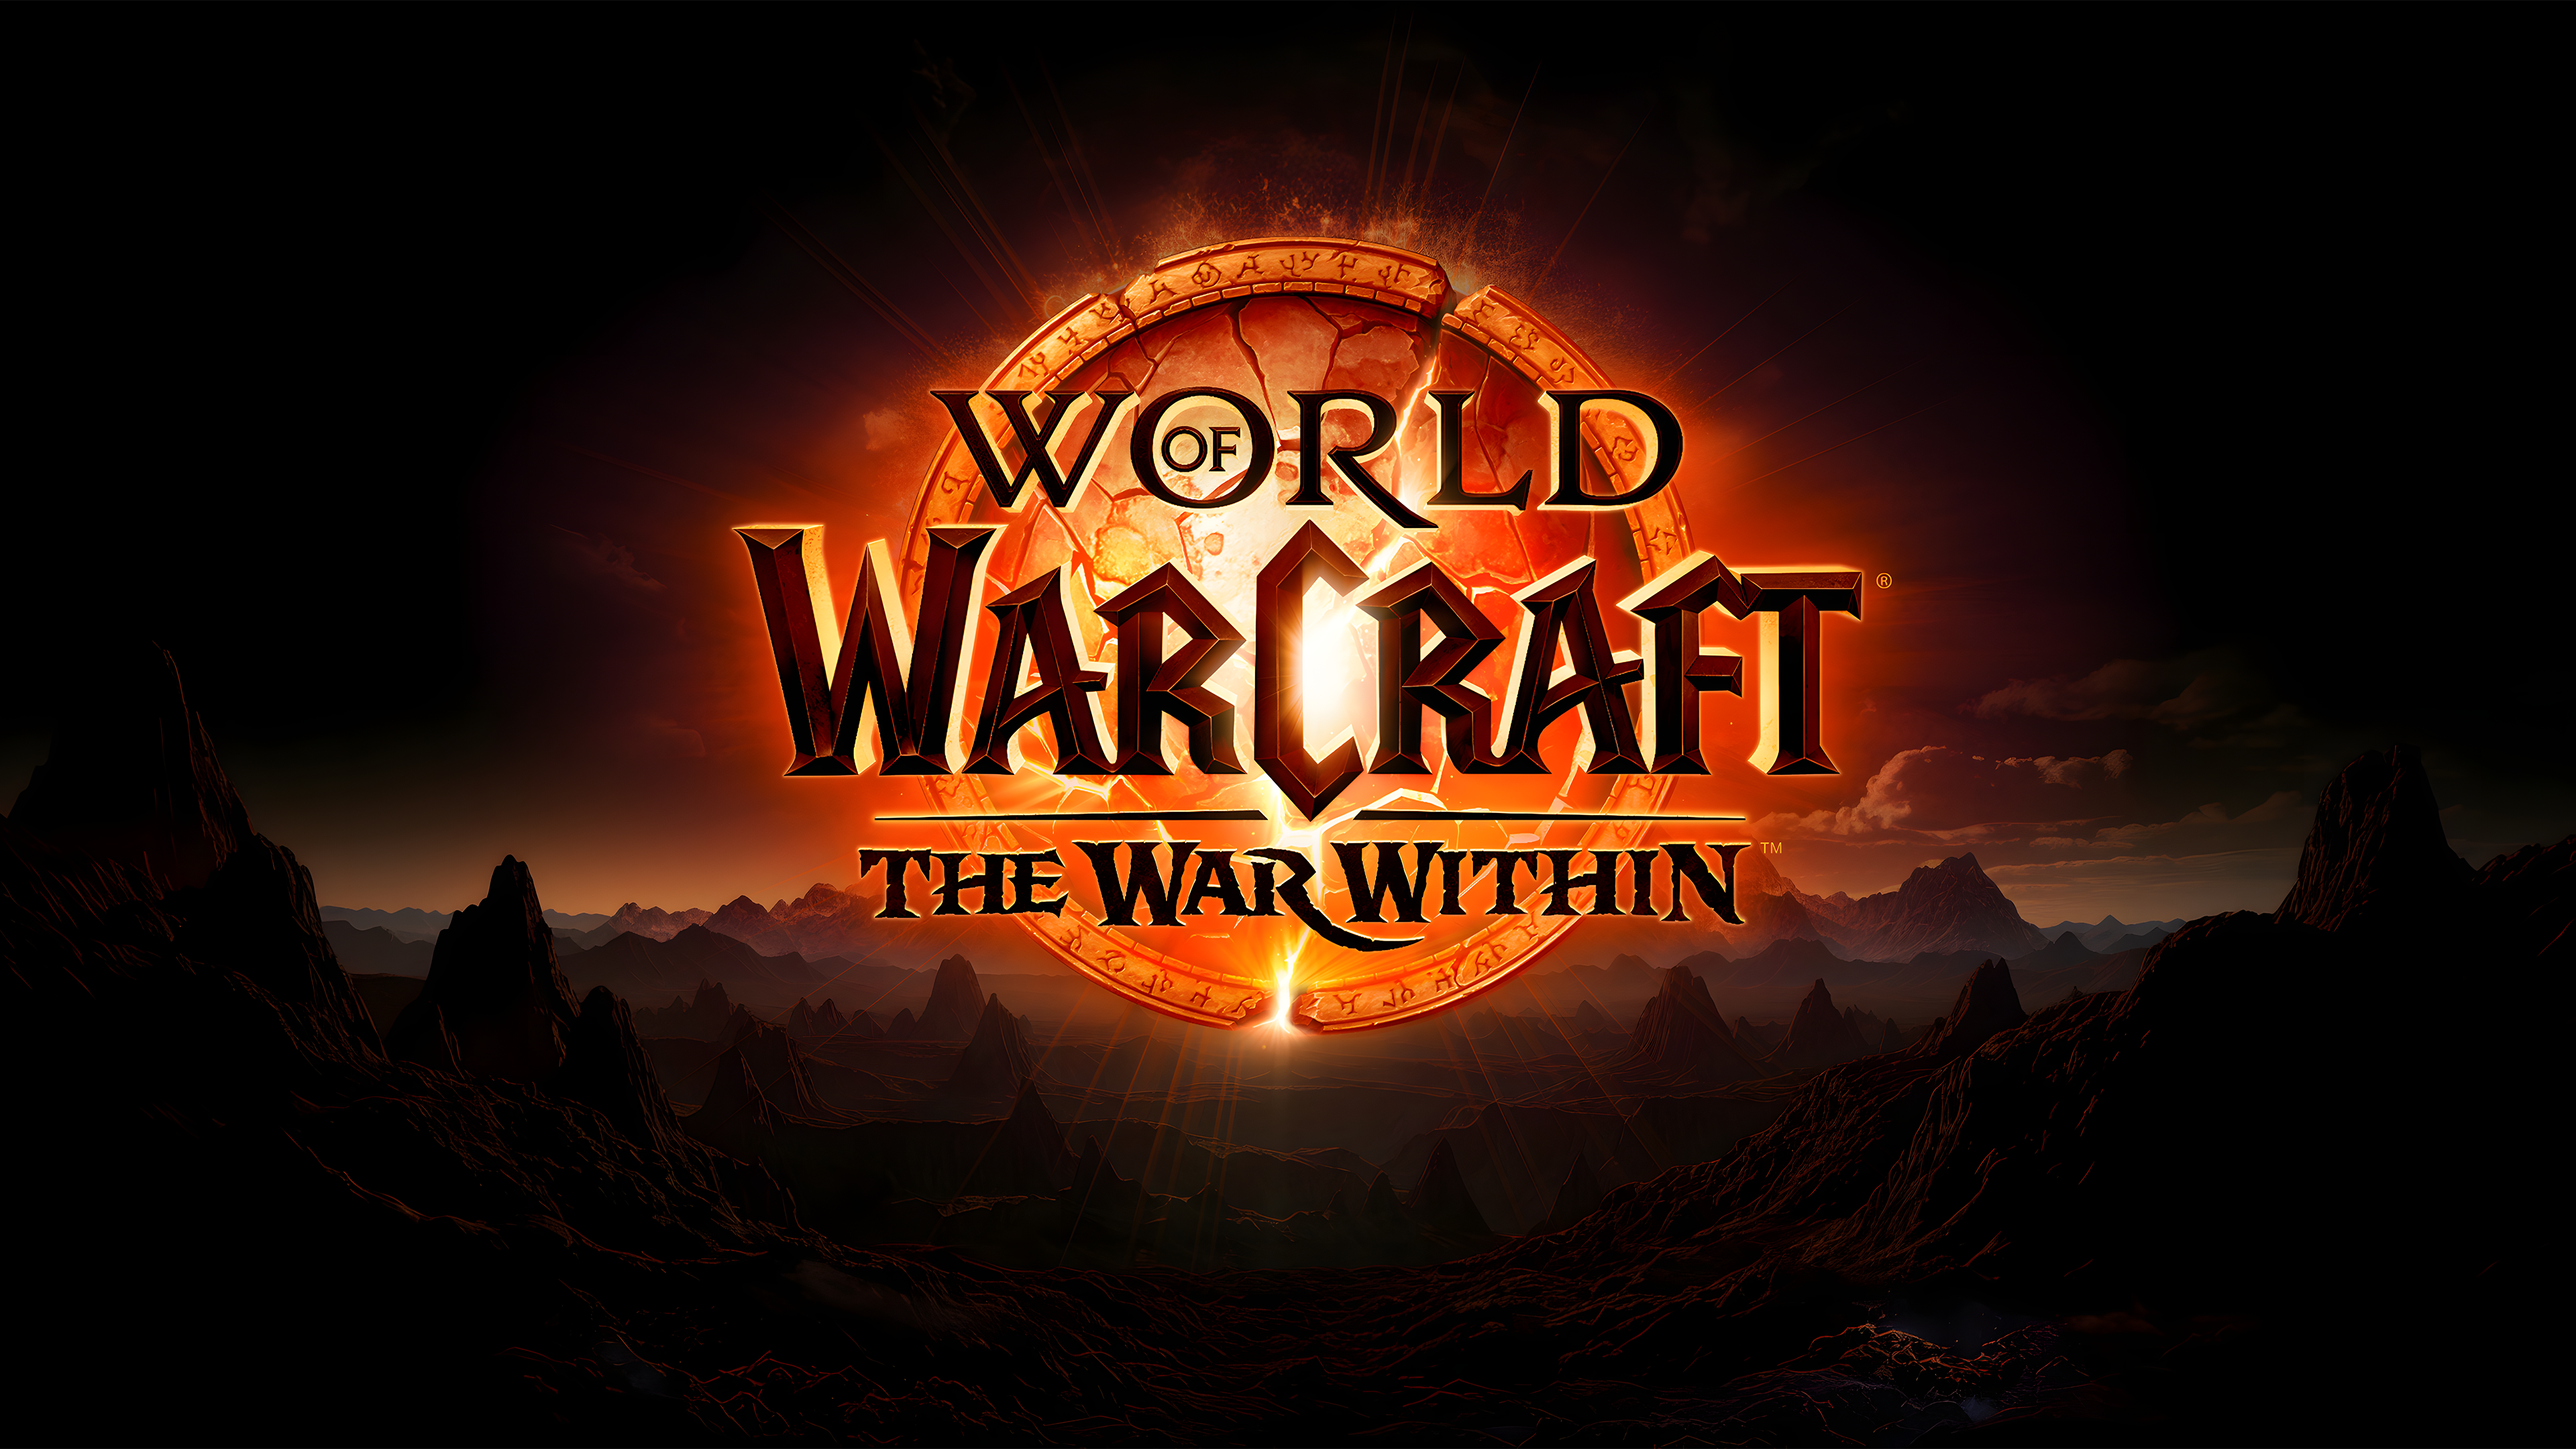 World Of Warcraft The War Within Blizzard Entertainment Warcraft World Of Warcraft Video Game Art Cl 3840x2160